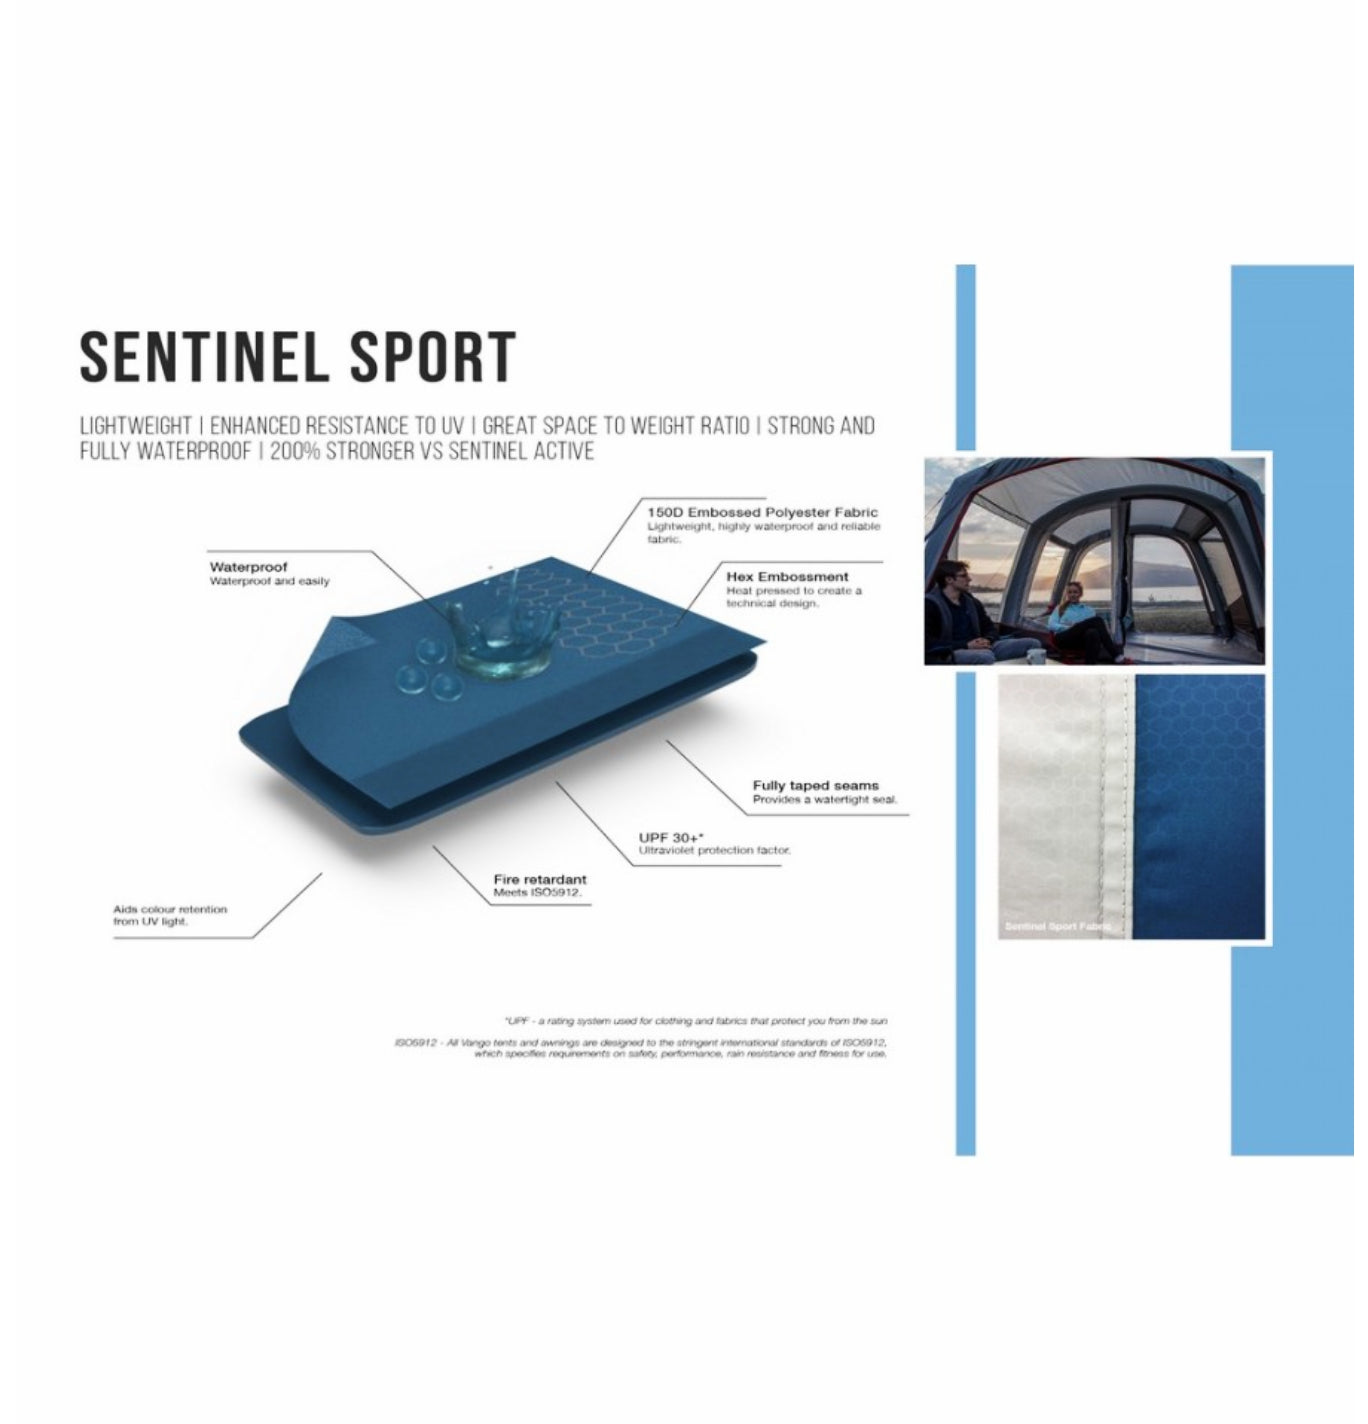 Information on the sentinel sport fabric